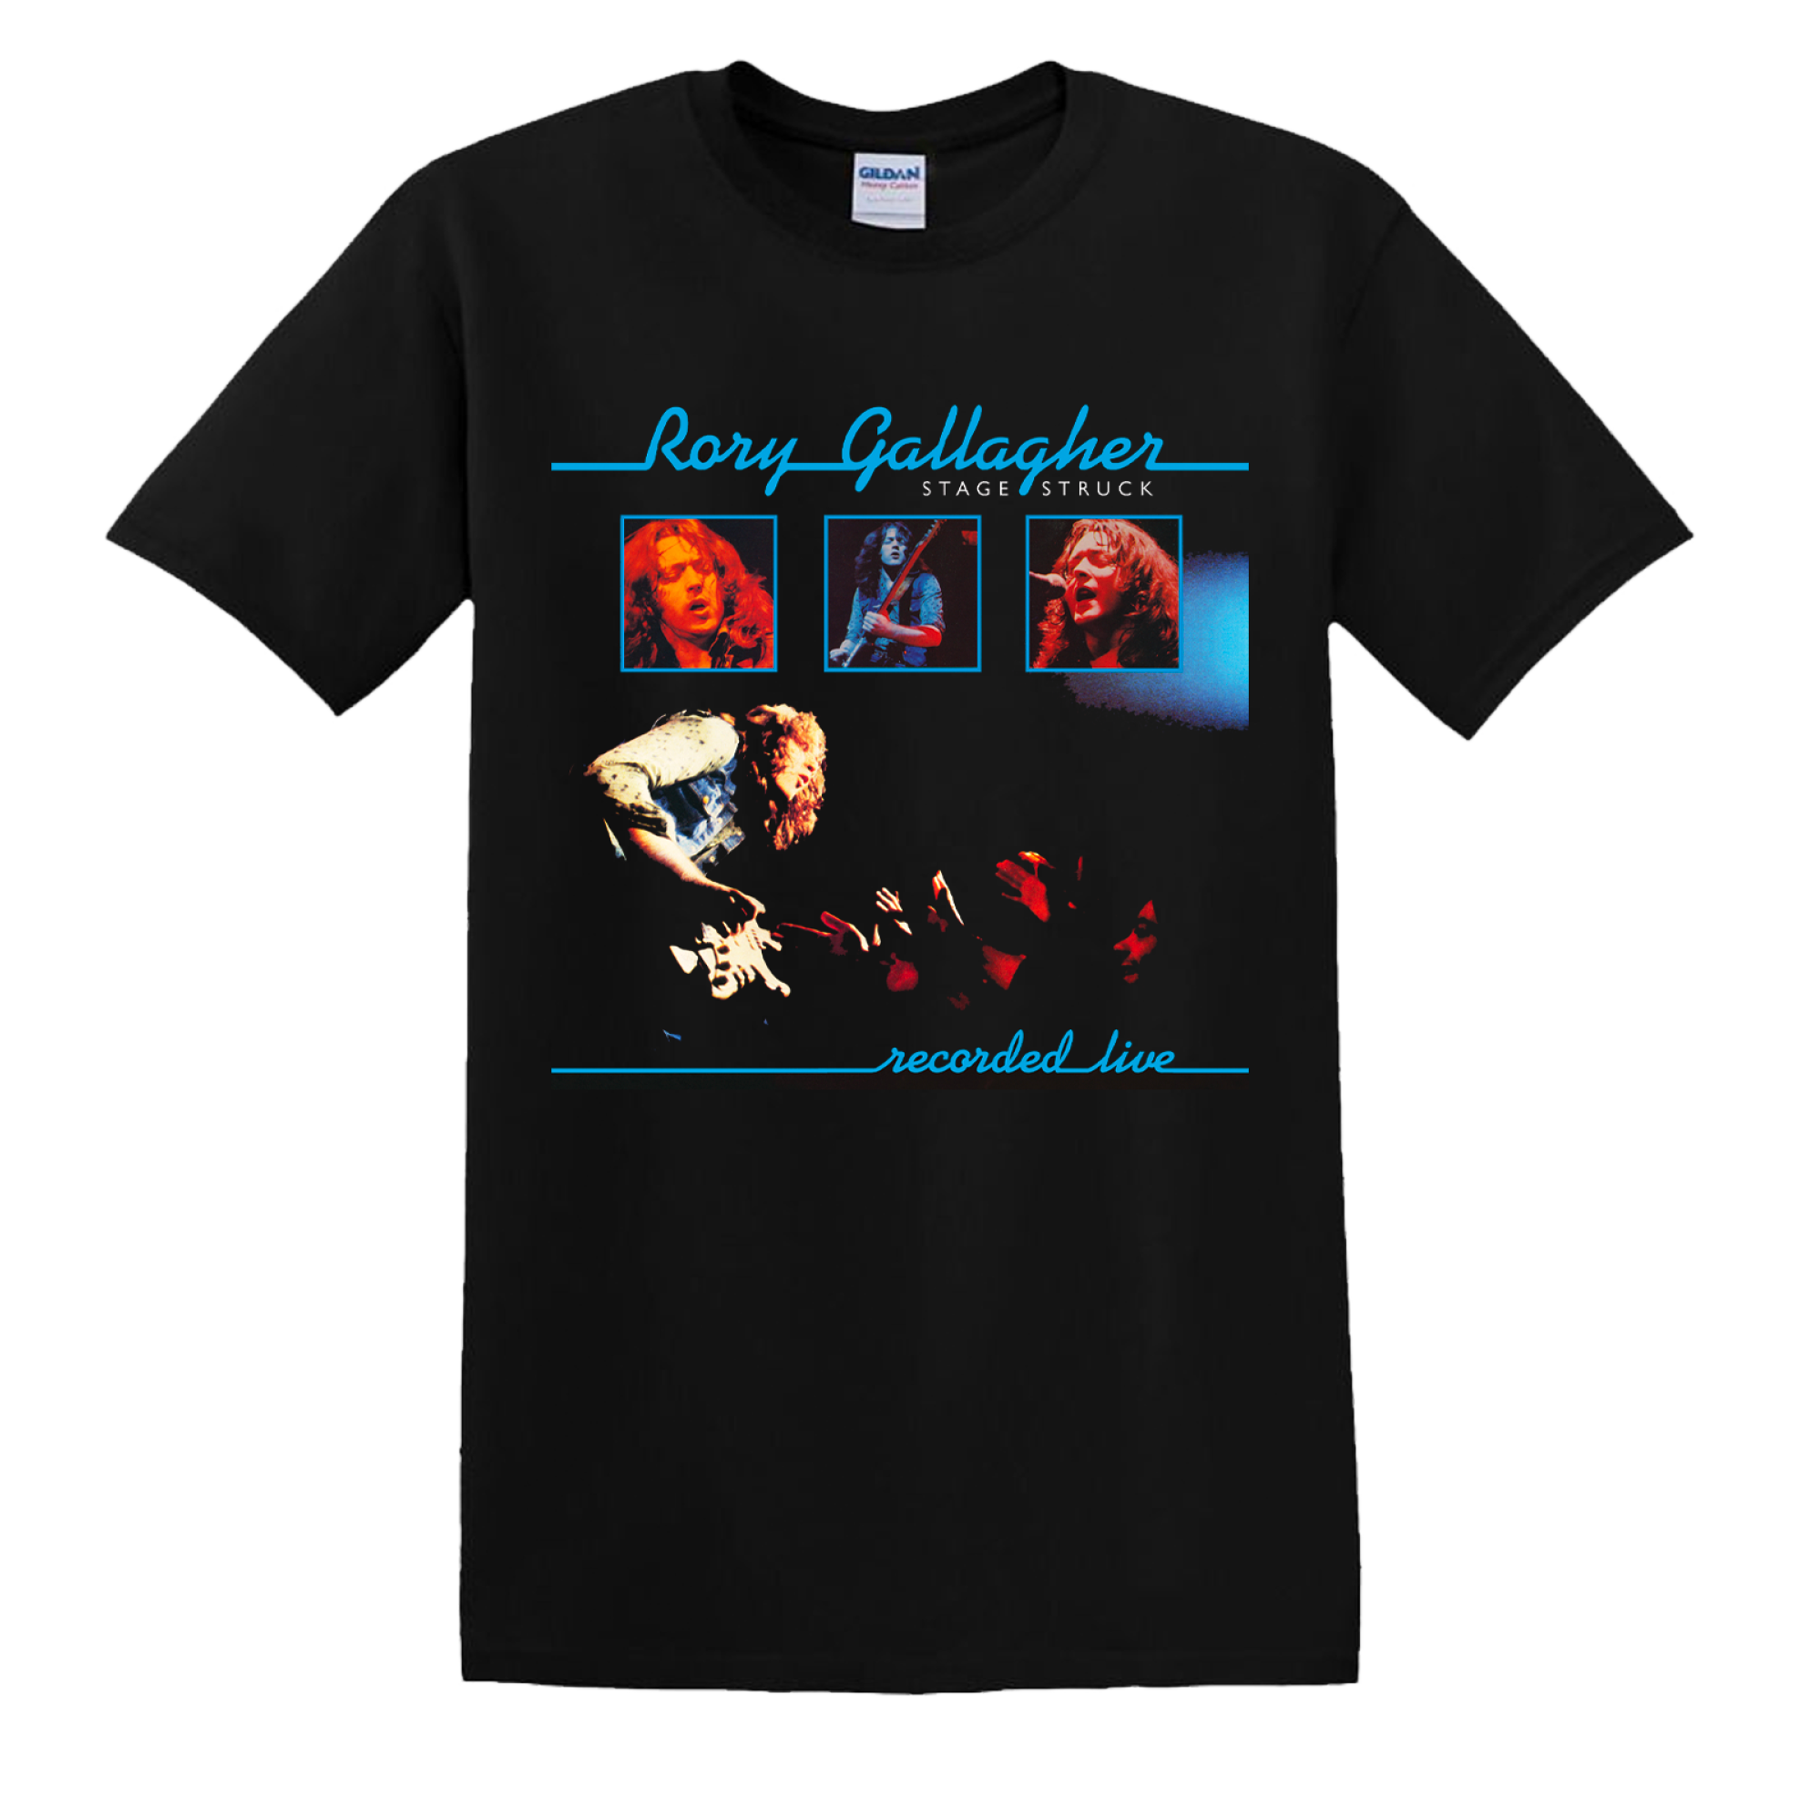 Rory Gallagher - Rory Gallagher - Official Stage Struck album (1980) T-shirt